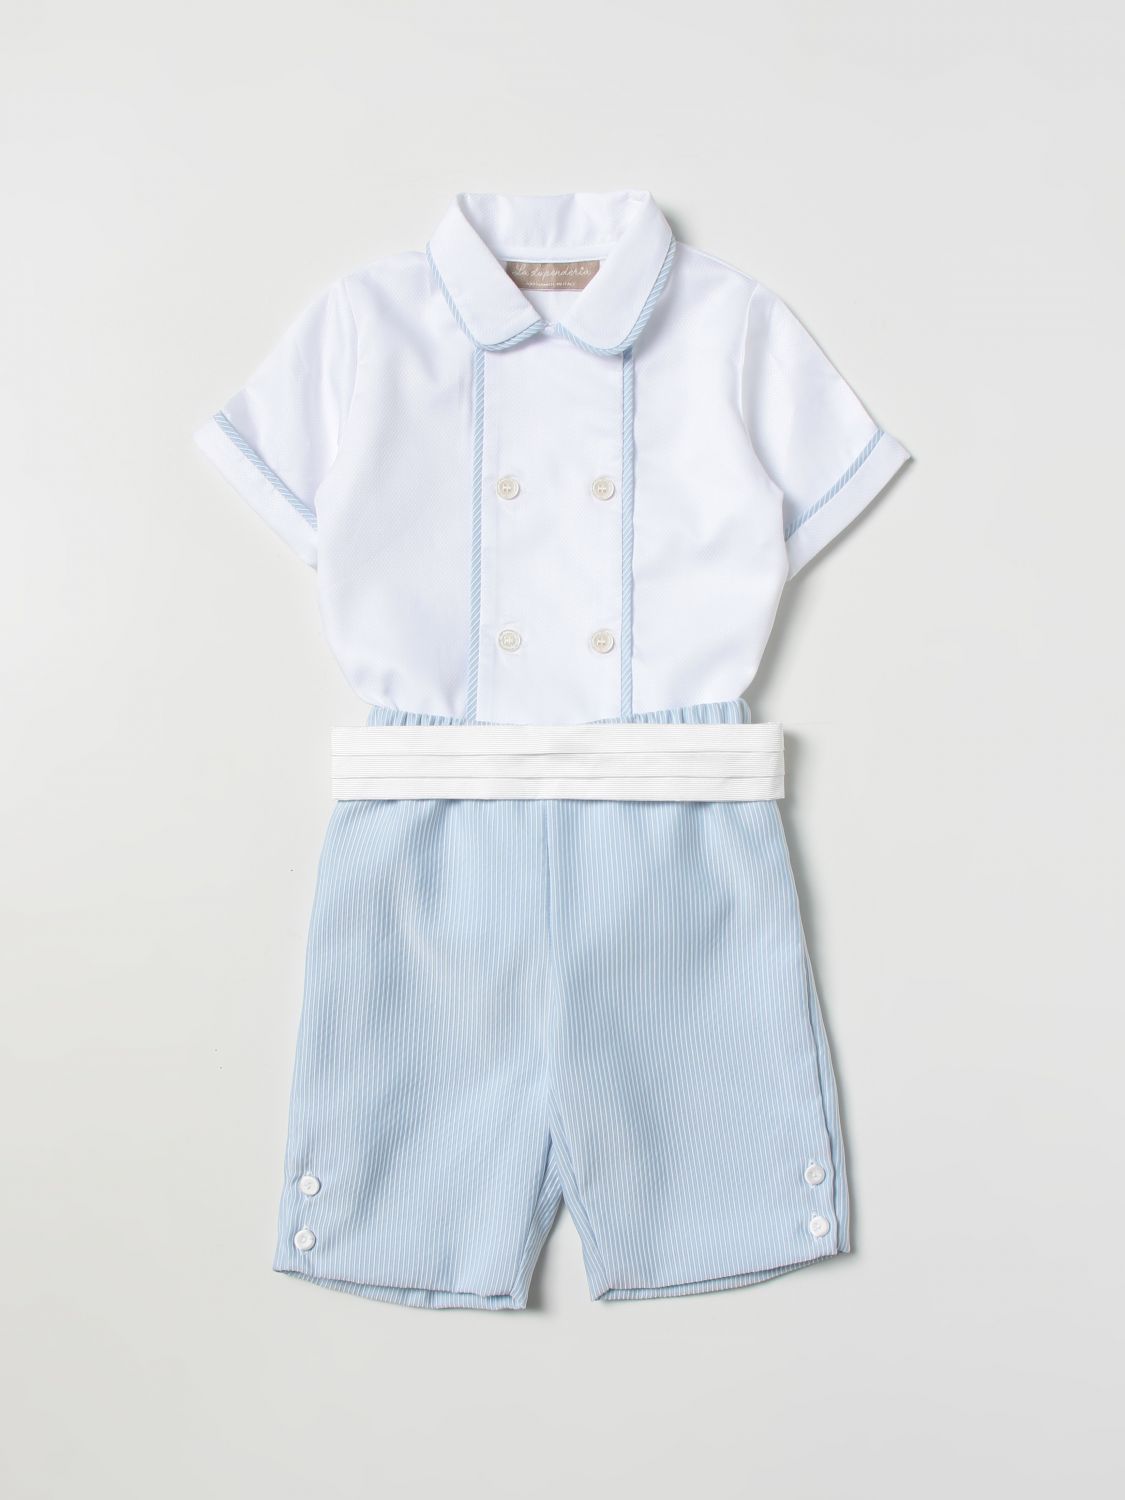 La Stupenderia Babies' Dungaree  Kinder Farbe Weiss In White